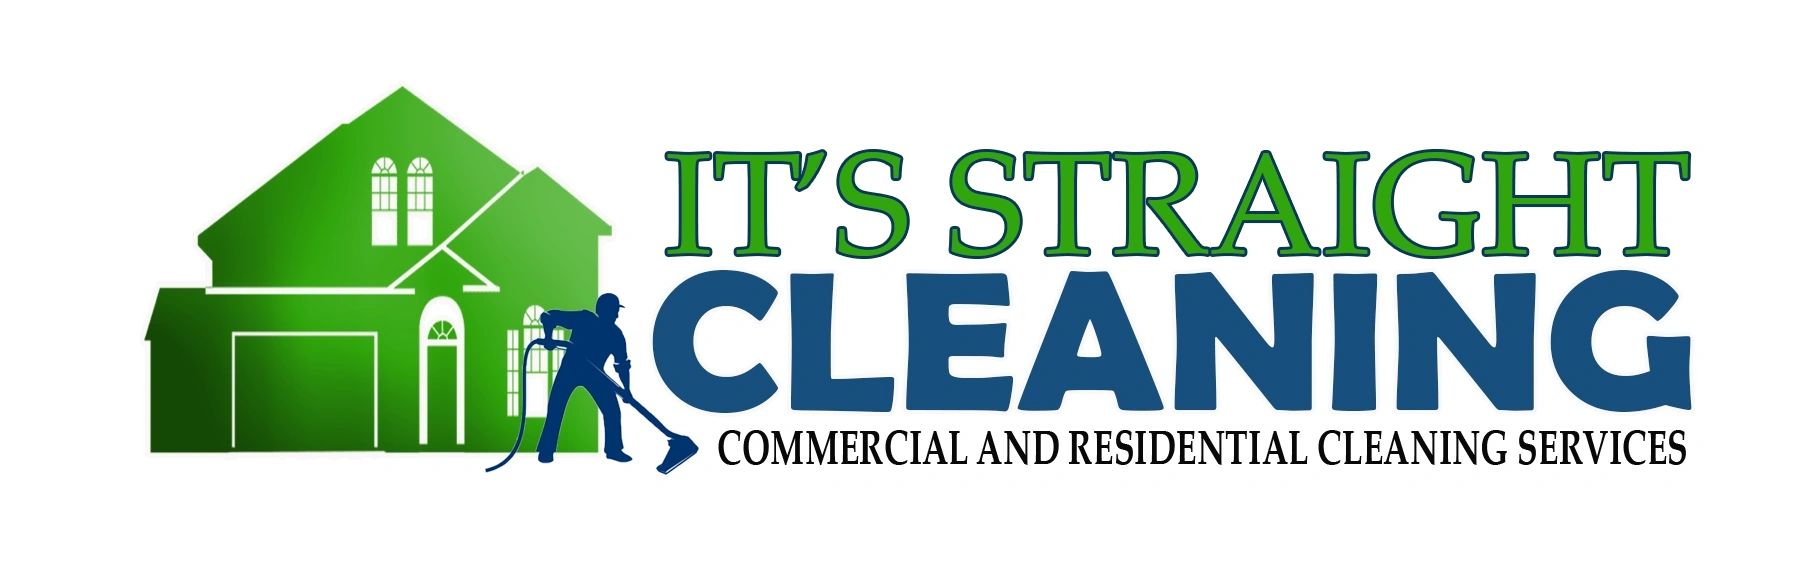 Carpet Cleaning - ITsSTRAIGHT CLEANING